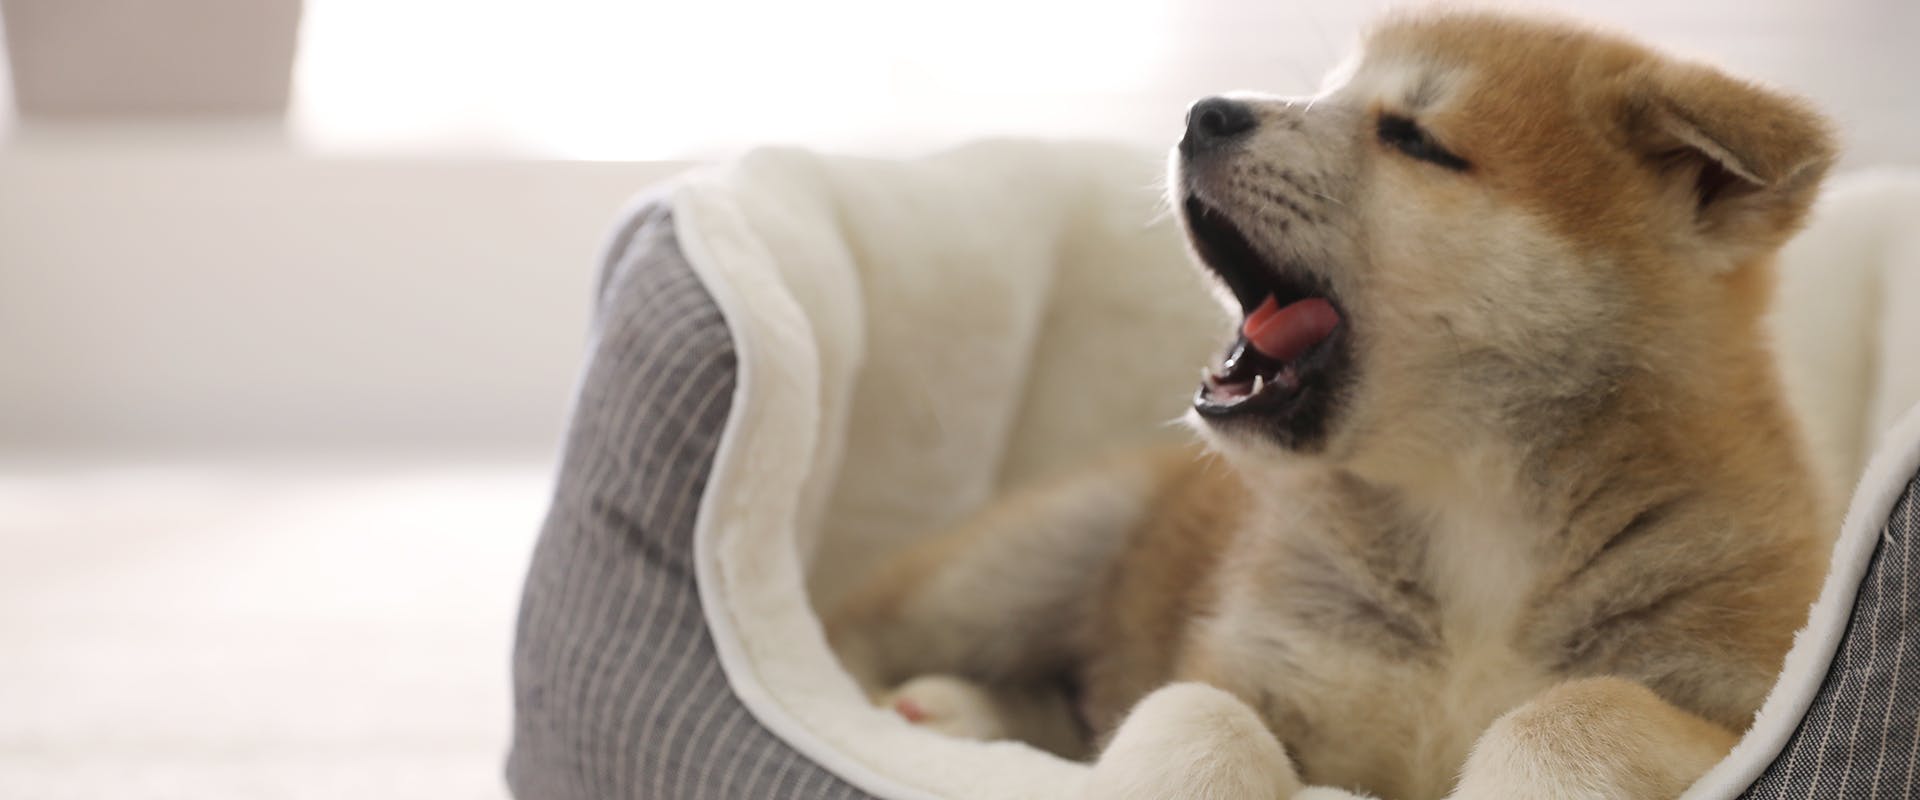 A Japanese Akita puppy yawning, sitting in a cozy dog bed